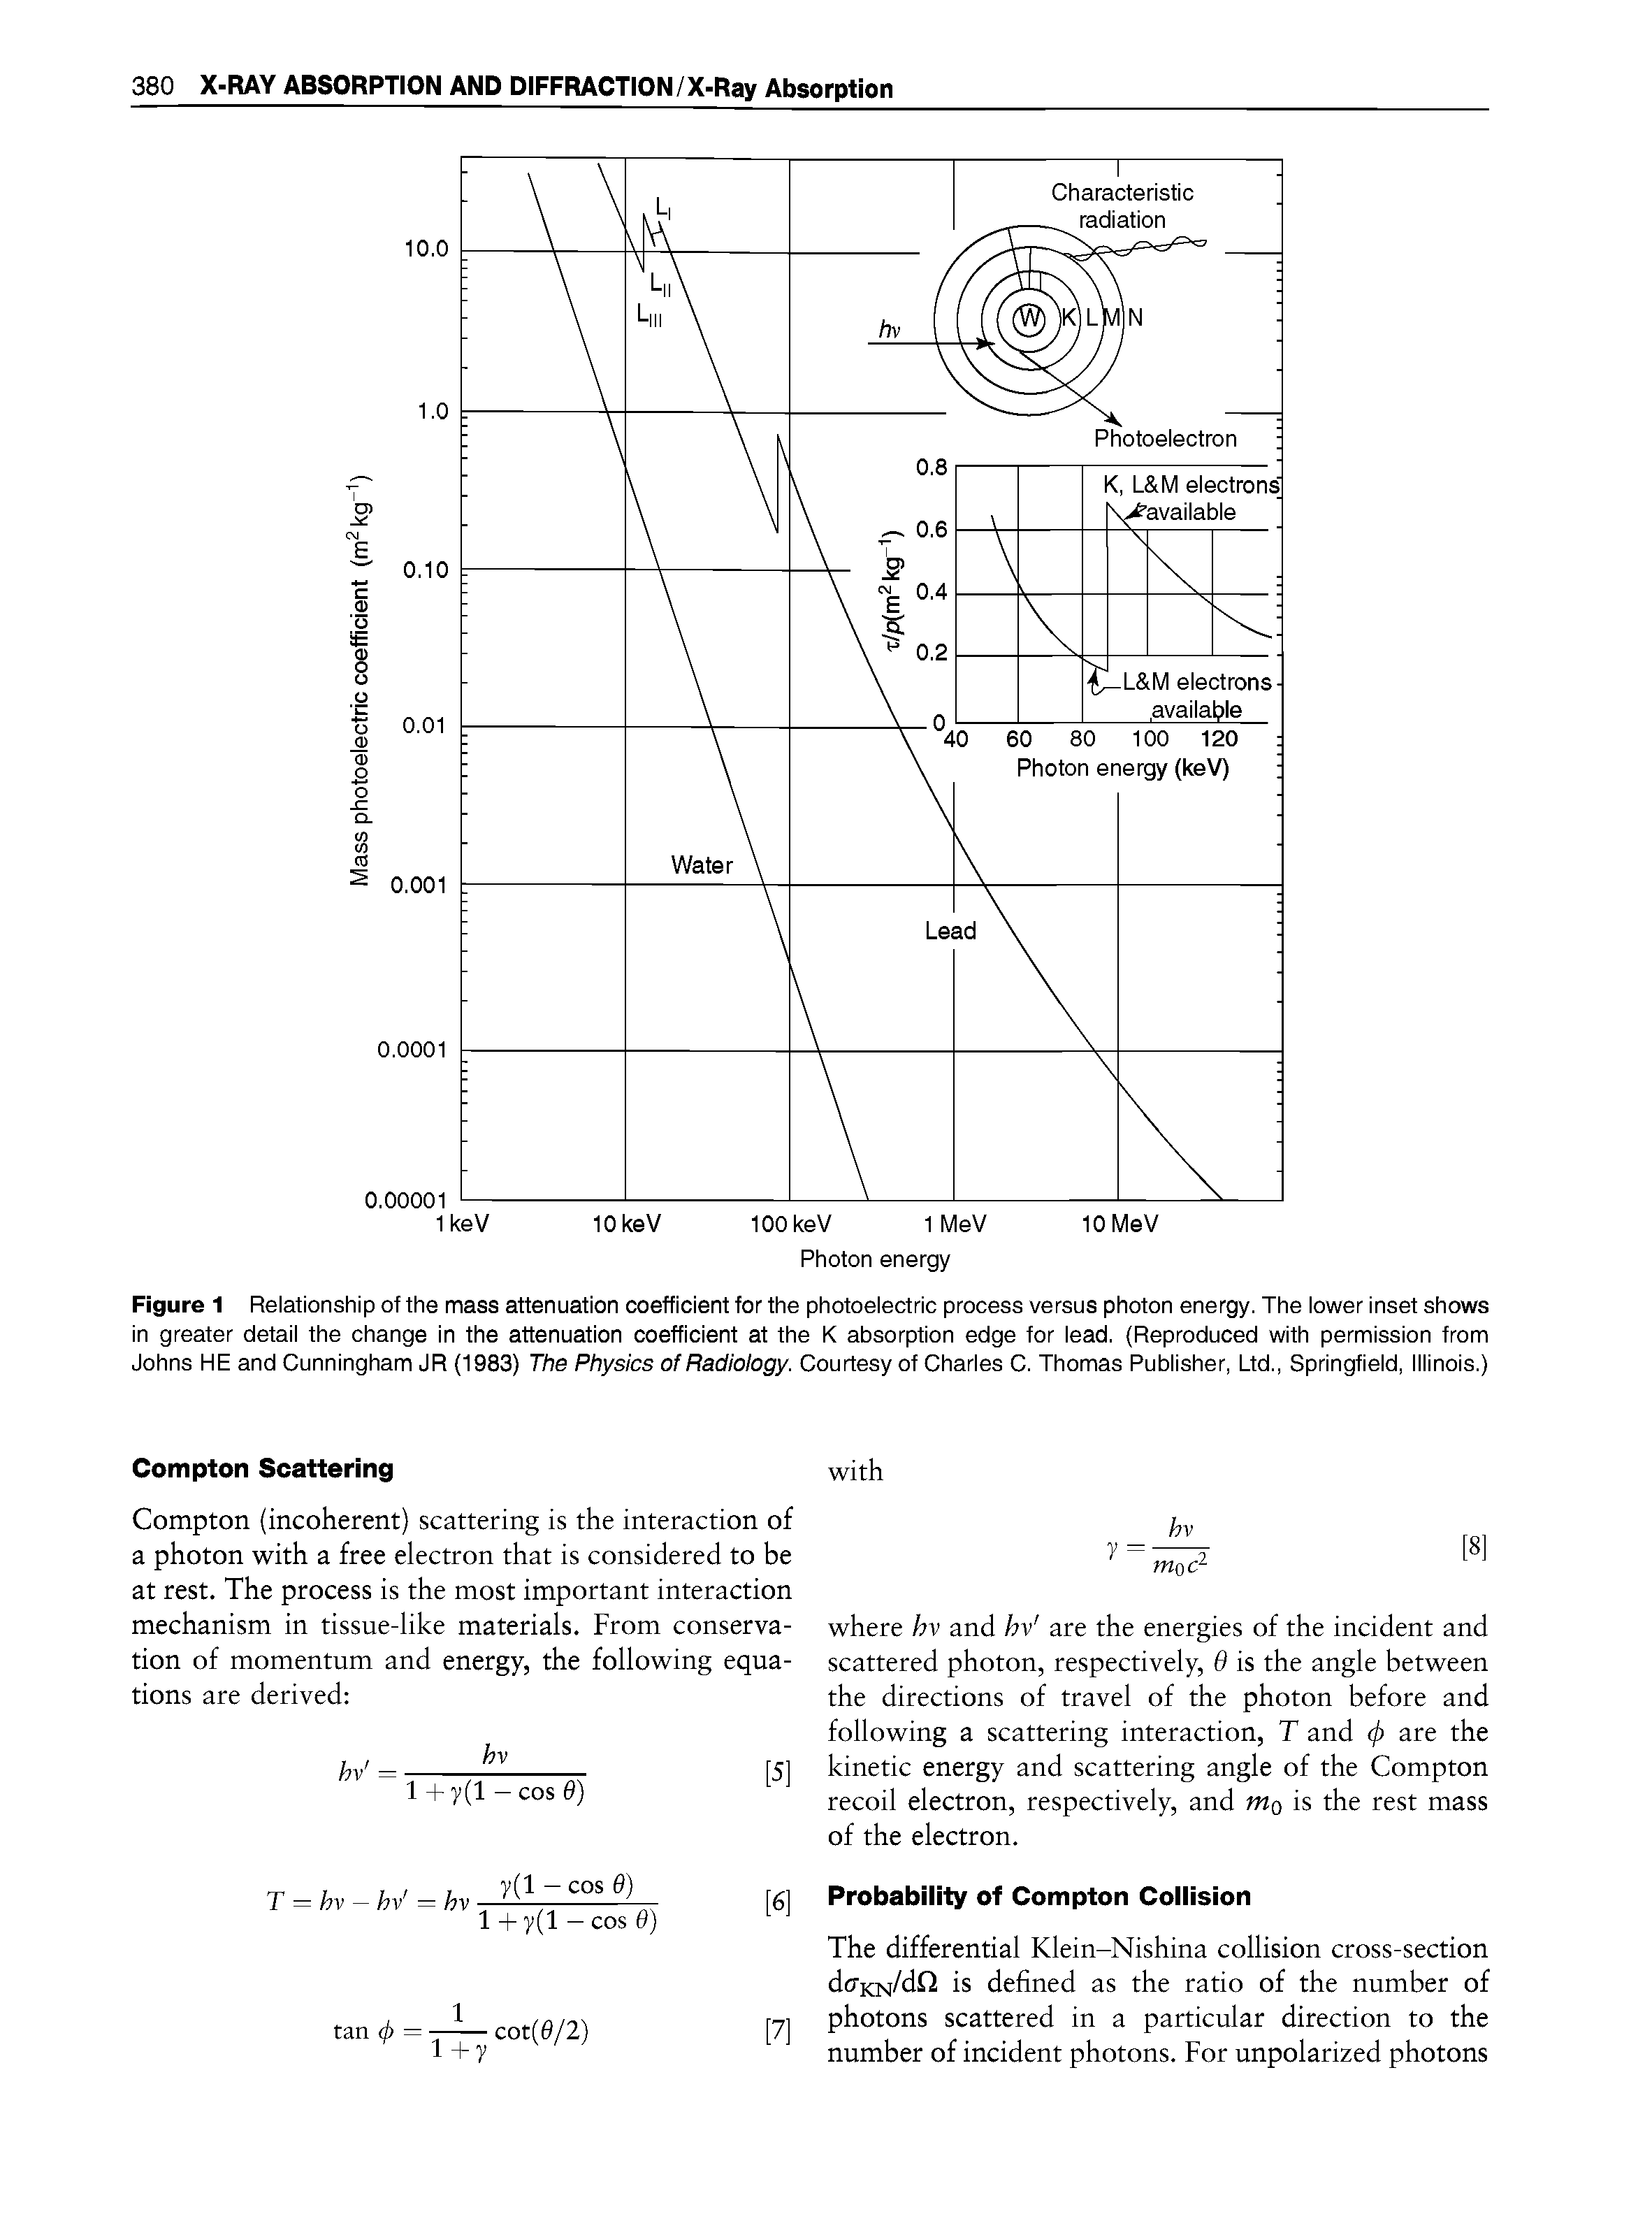 Figure 1 Relationship of the mass attenuation coefficient for the photoelectric process versus photon energy. The lower inset shows in greater detail the change in the attenuation coefficient at the K absorption edge for lead. (Reproduced with permission from Johns HE and Cunningham JR (1983) The Physics of Radiology. Courtesy of Charles C. Thomas Publisher, Ltd., Springfield, Illinois.)...